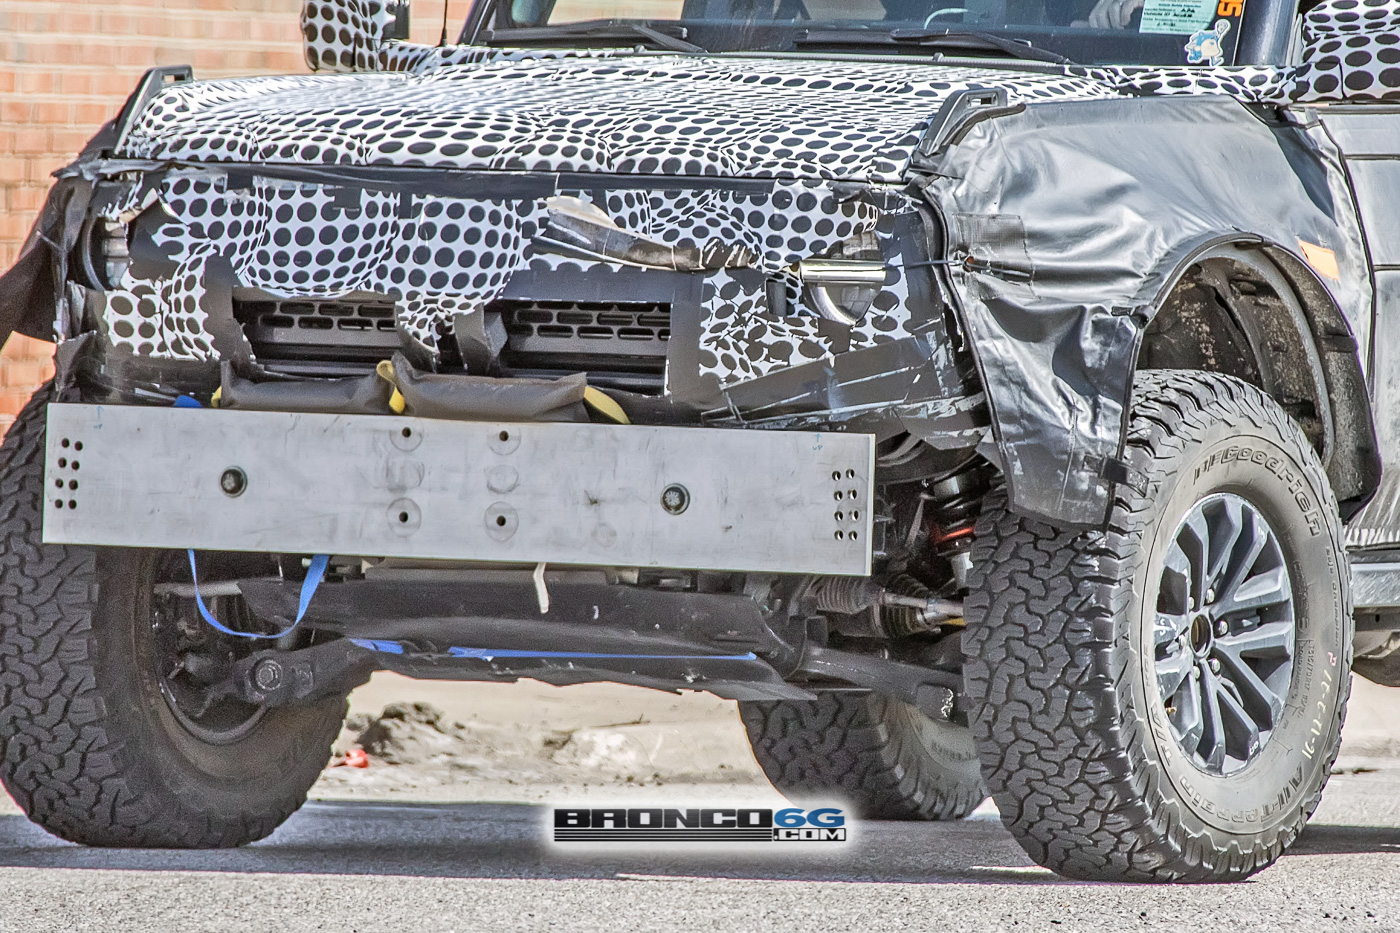 Ford Bronco Spotted: New Bronco concept (Warthog) to be unveiled? 1616530707423